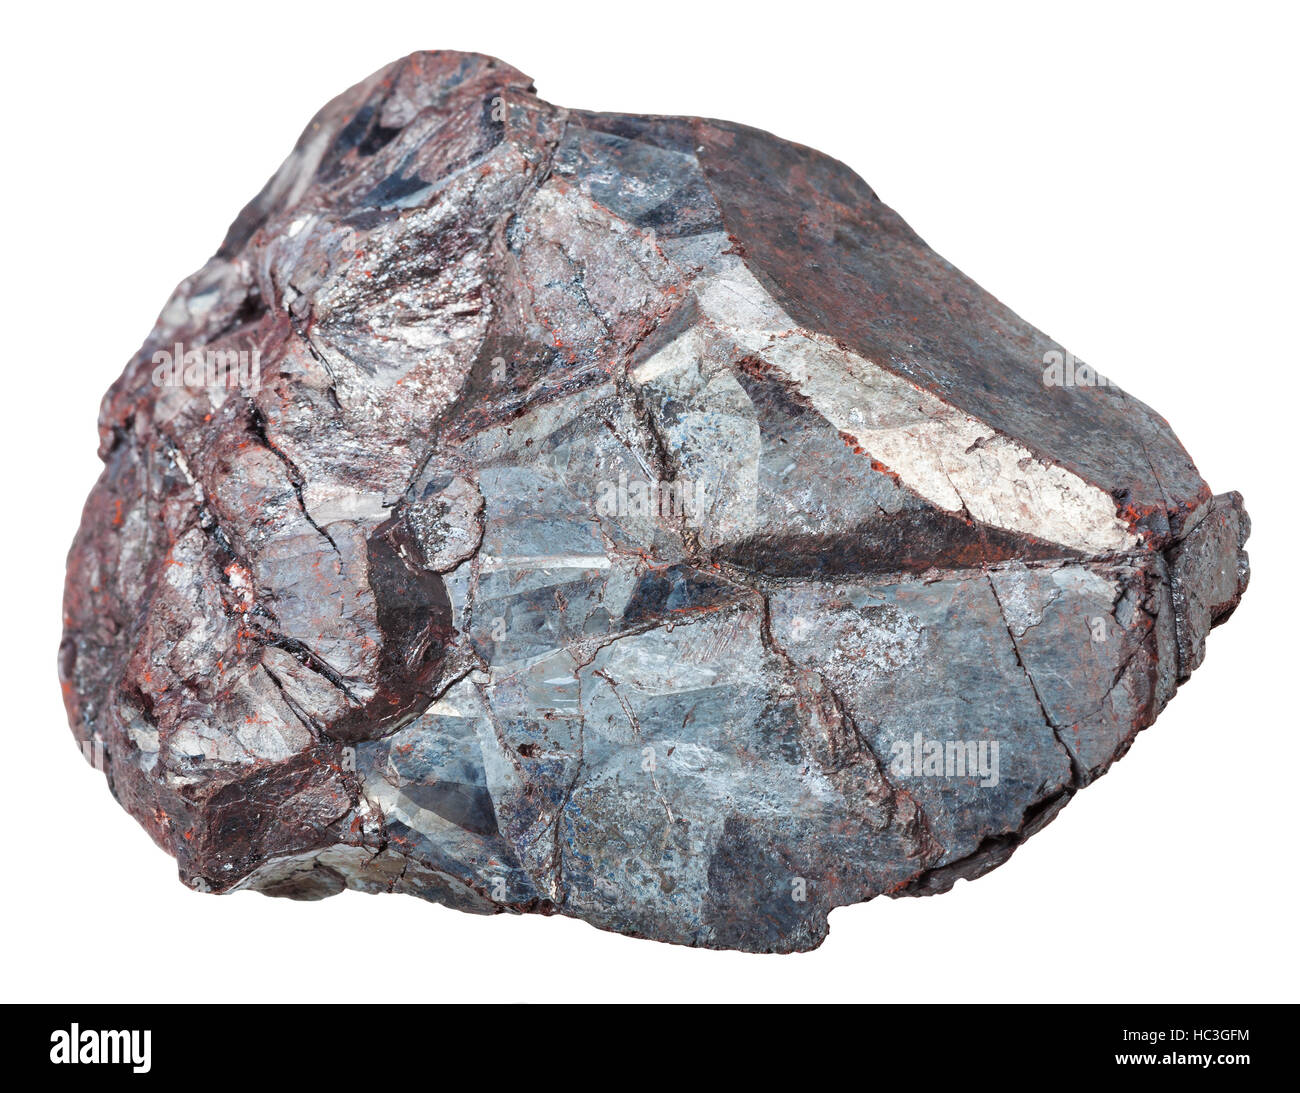 macro shooting of specimen of natural mineral - piece of Hematite (iron ore, haematite) rock isolated on white background Stock Photo